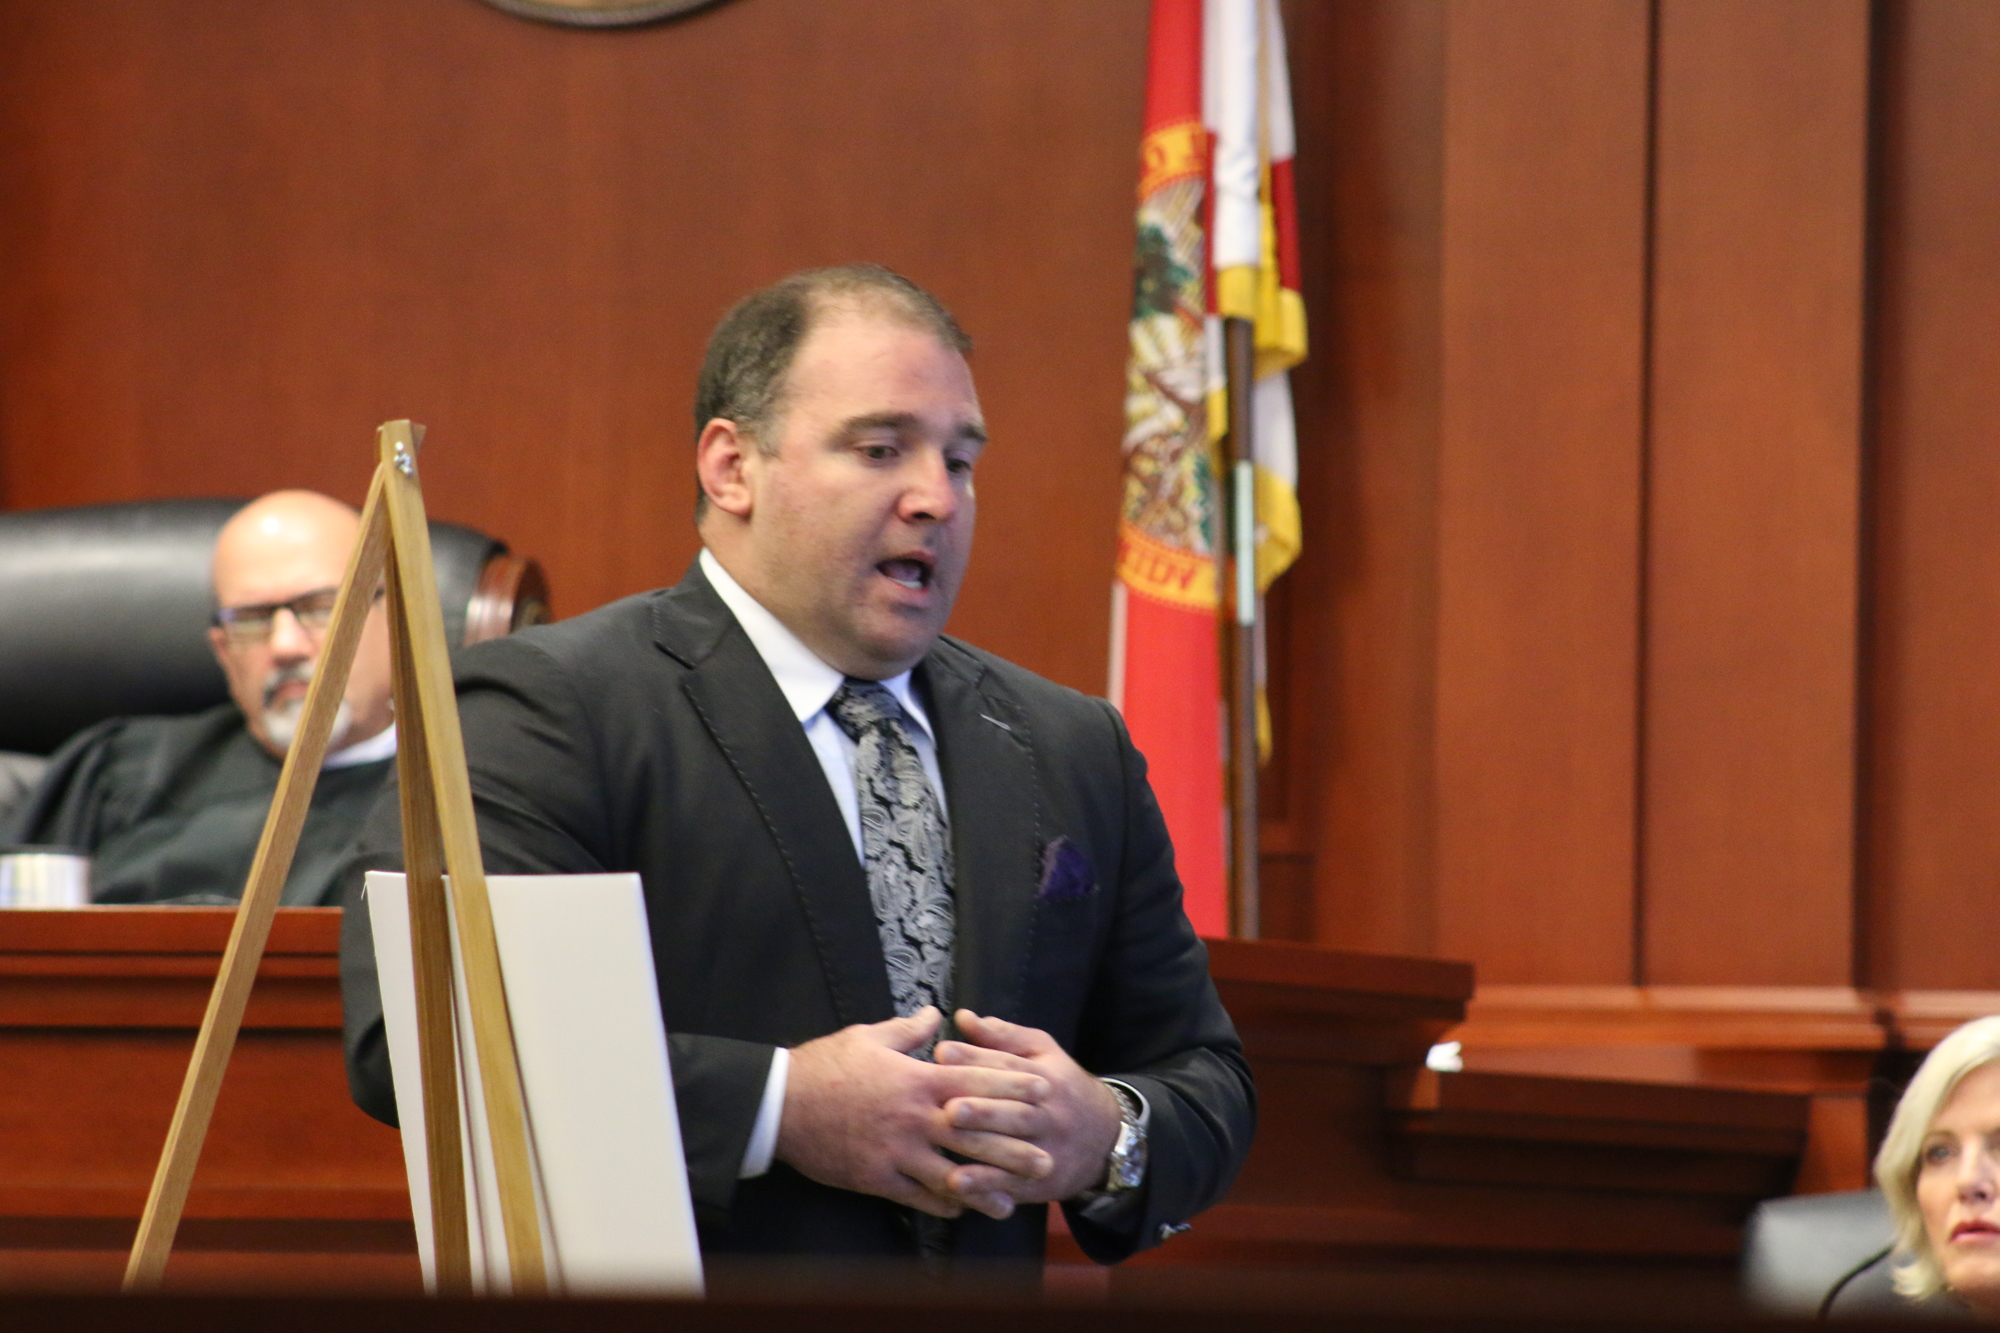 Attorney and Daytona Beach City Commissioner Aaron Delgado  conducts the opening statements on behalf of James and Dale Holcombe for their trial. Photo by Jarleene Almenas